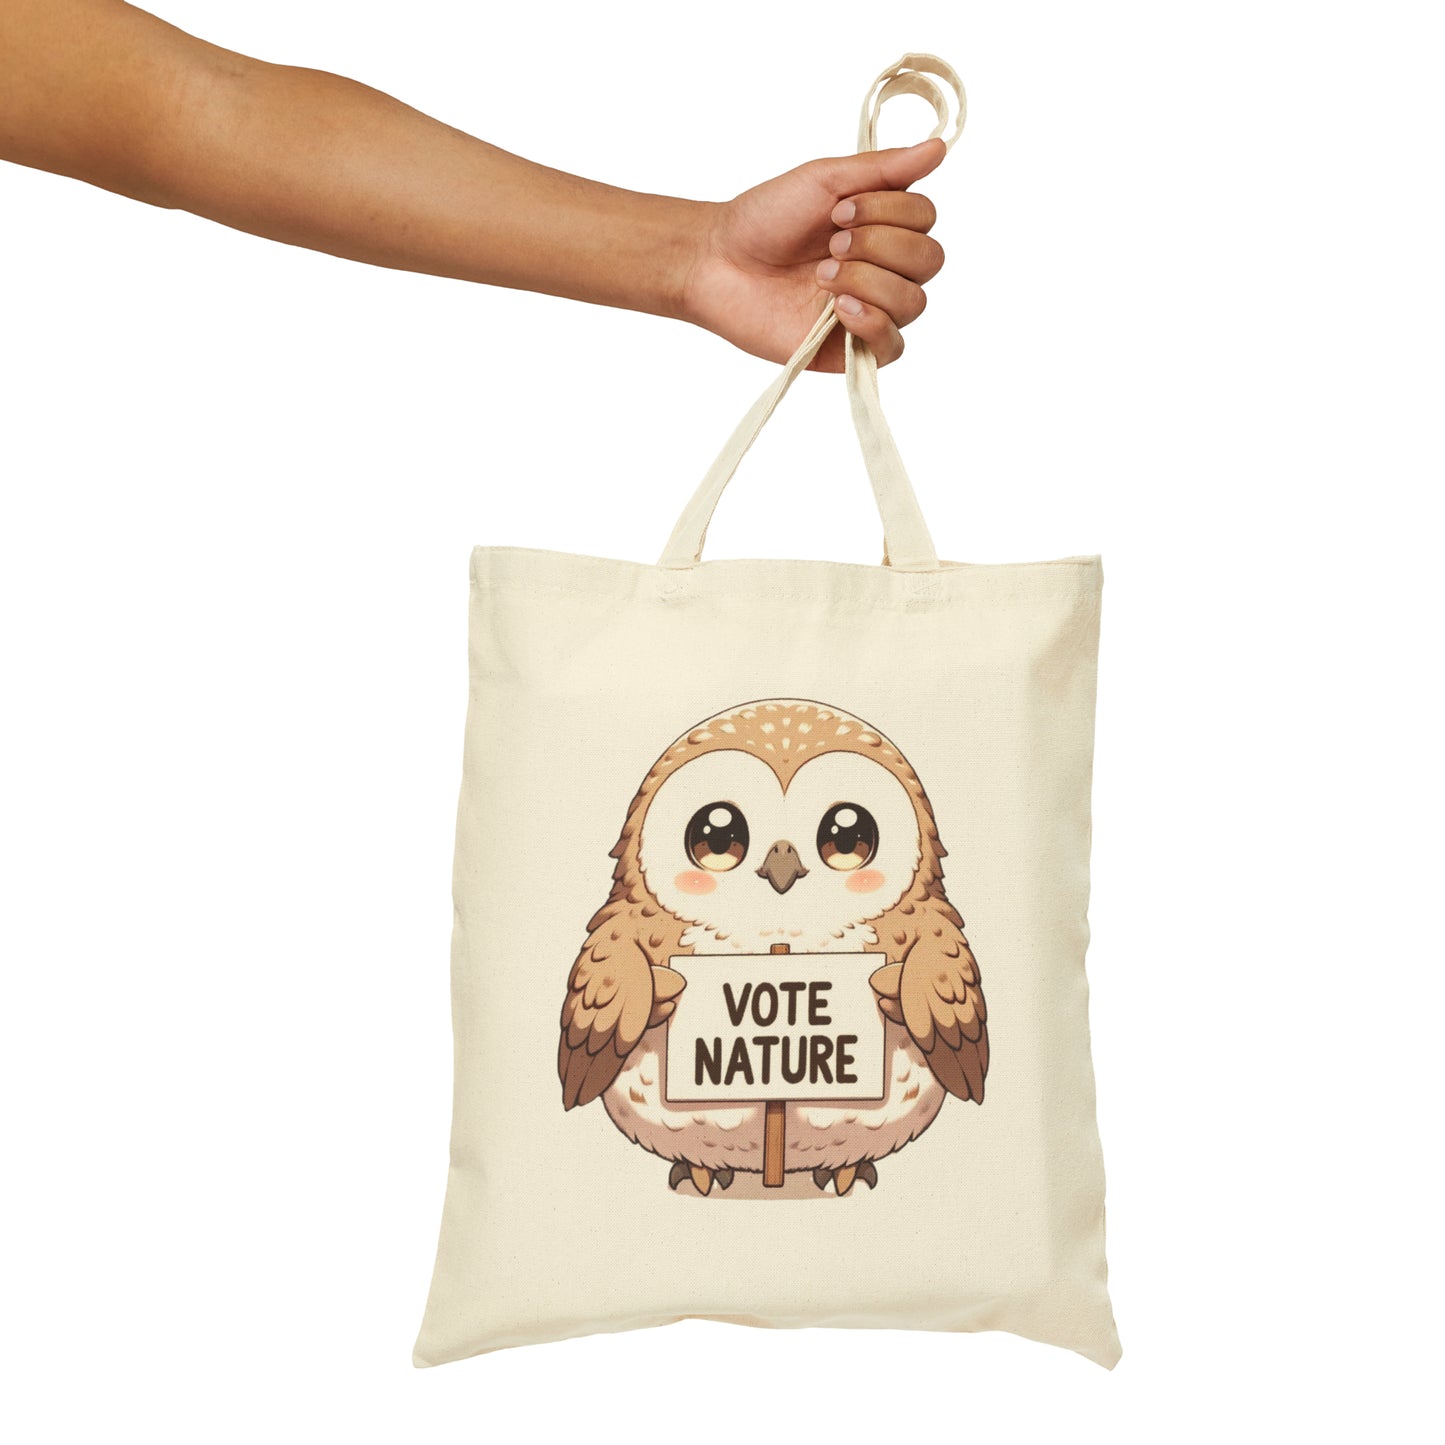 Inspirational Cute Owl Statement Cotton Canvas Tote Bag: Vote Nature! & carry a laptop, kindle, phone, notebook, goodies to work/coffee shop